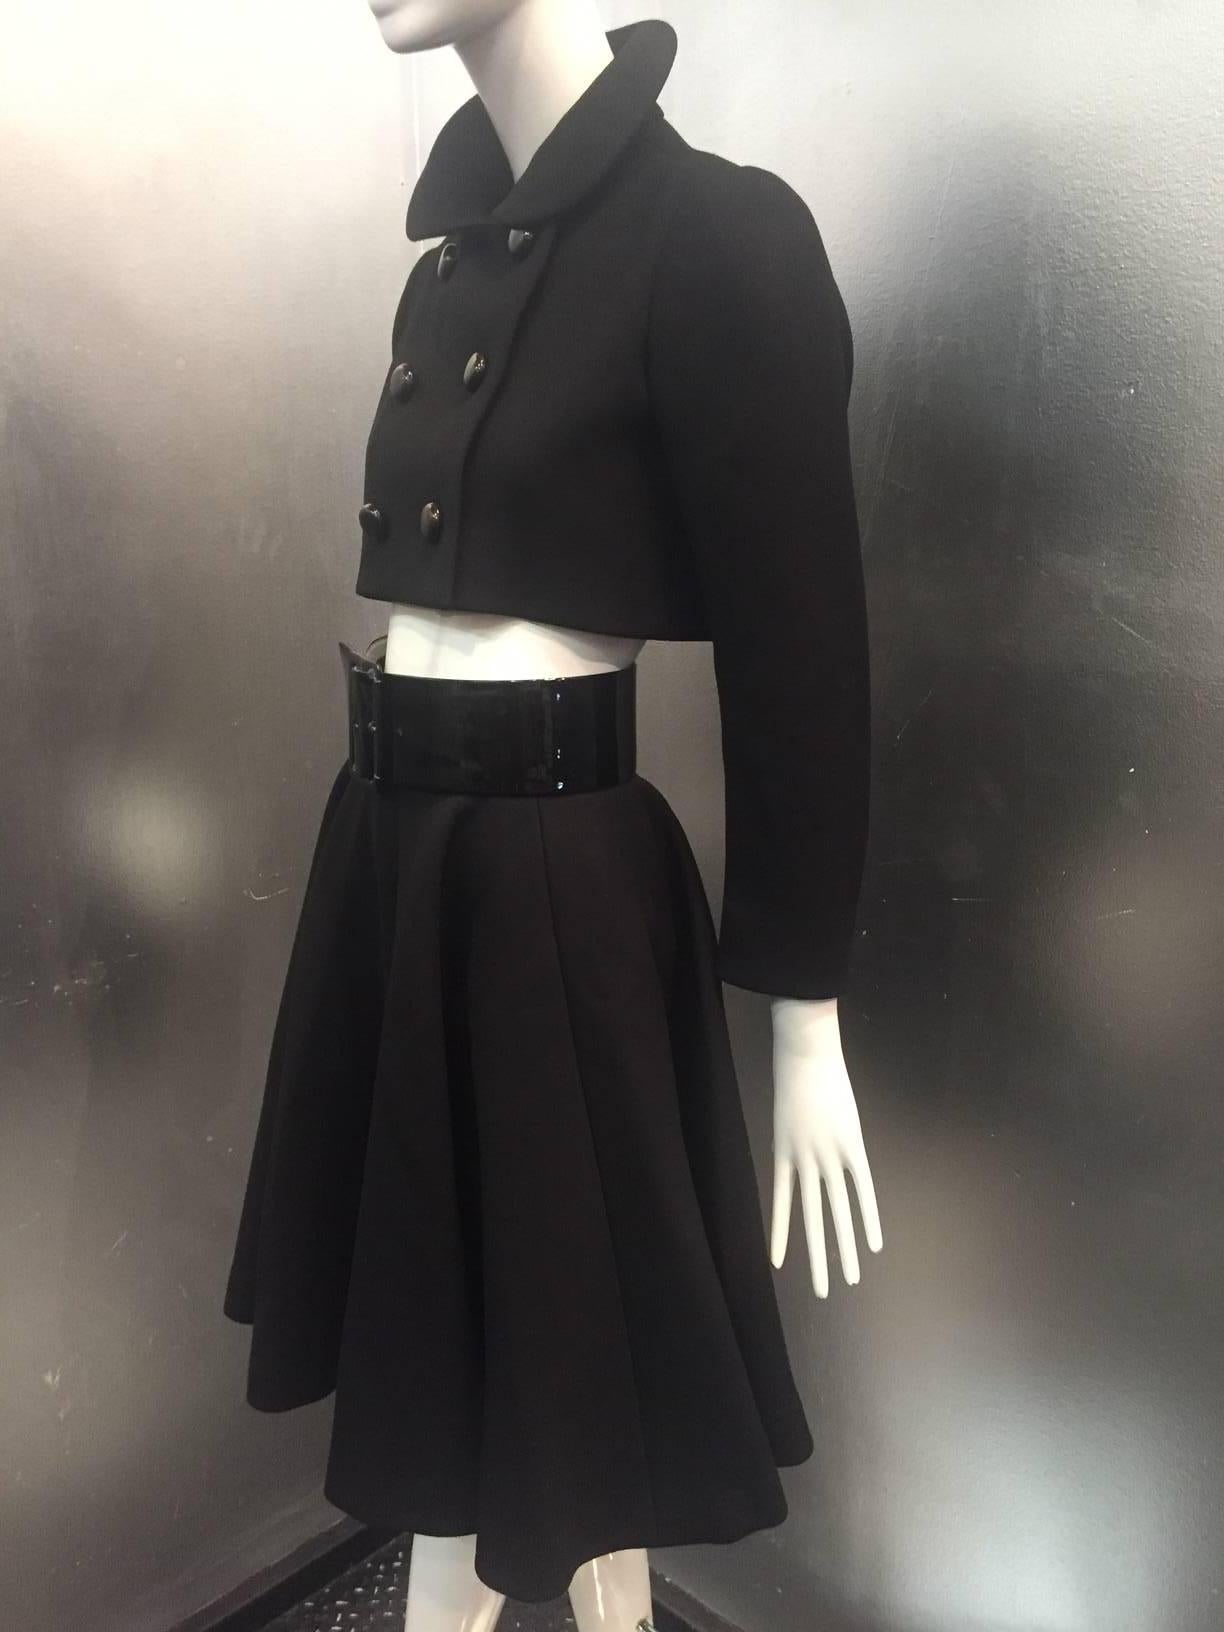 A fantastic 1960s black wool Norman Norell skirt and jacket suit:  Jacket is double breasted with large black bubble-style buttons, cropped short in a bolero style with structured shoulders and Peter Pan collar.  Skirt is flared and full with a